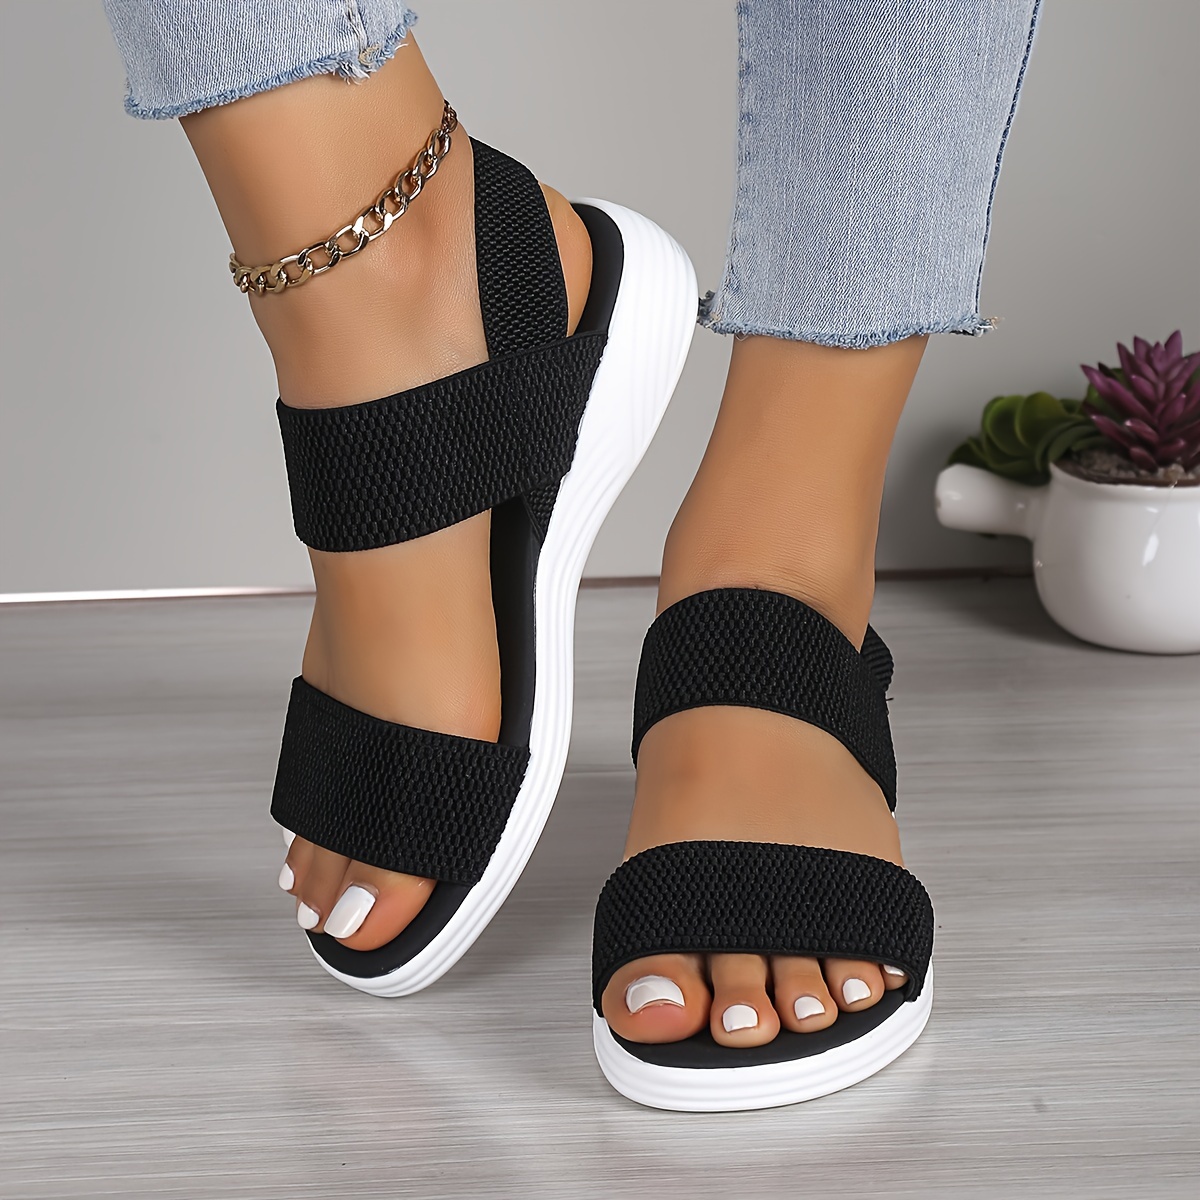 

Women's Elastic Band Flat Sandals, Casual Lightweight Open Toe Slip On Shoes, Comfy Outdoor Beach Sandals